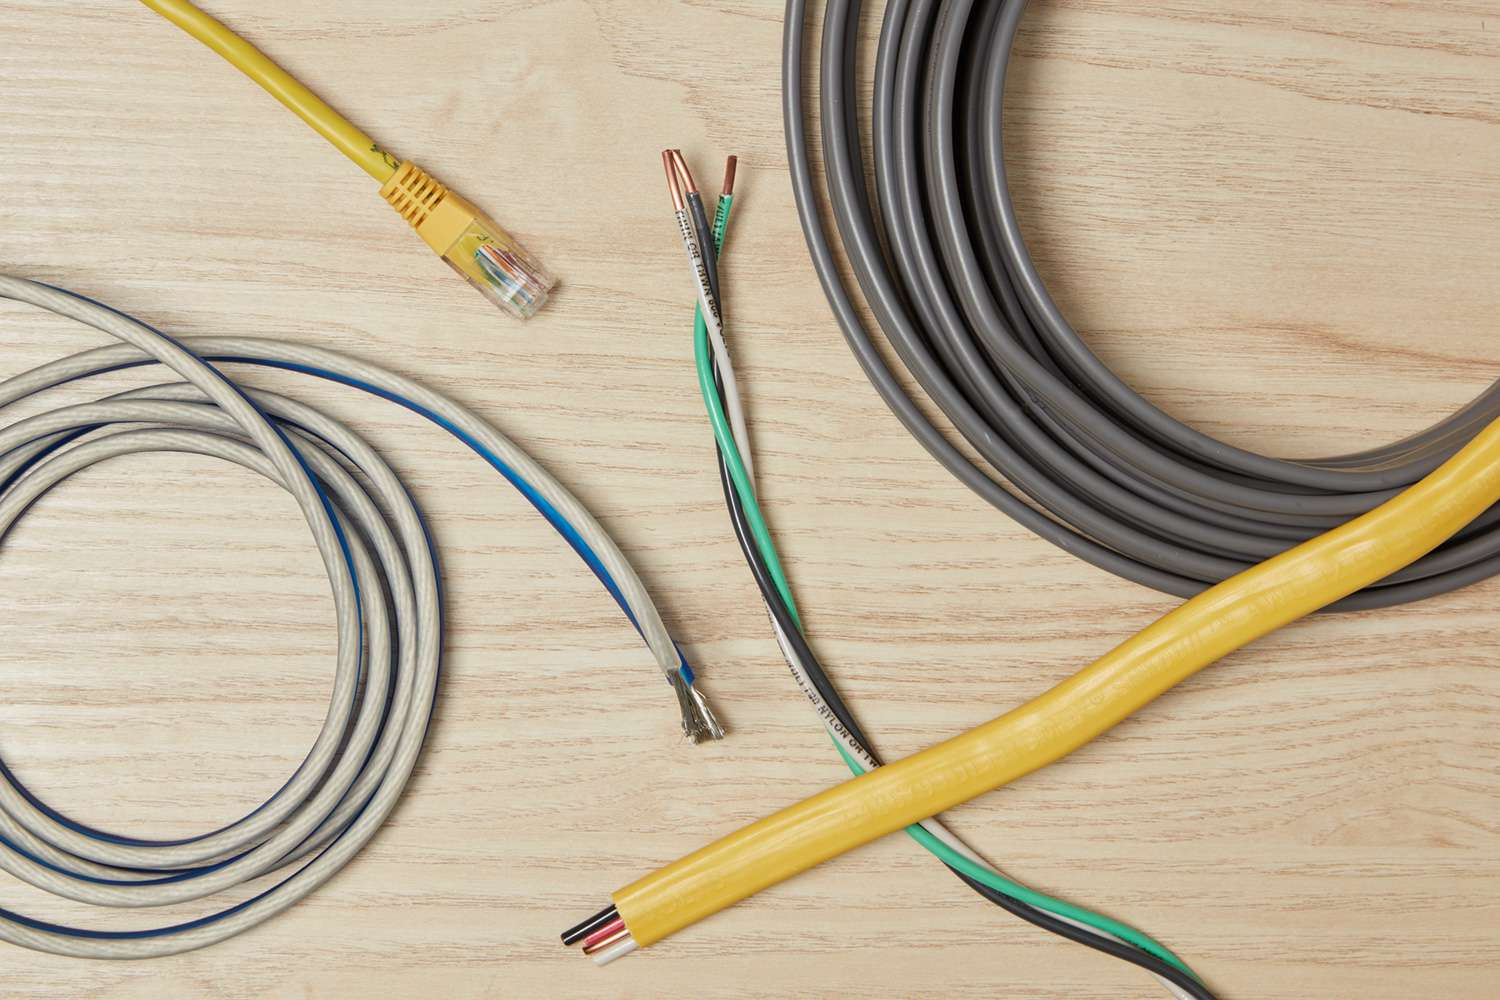 Types of Electrical Wires And Cables